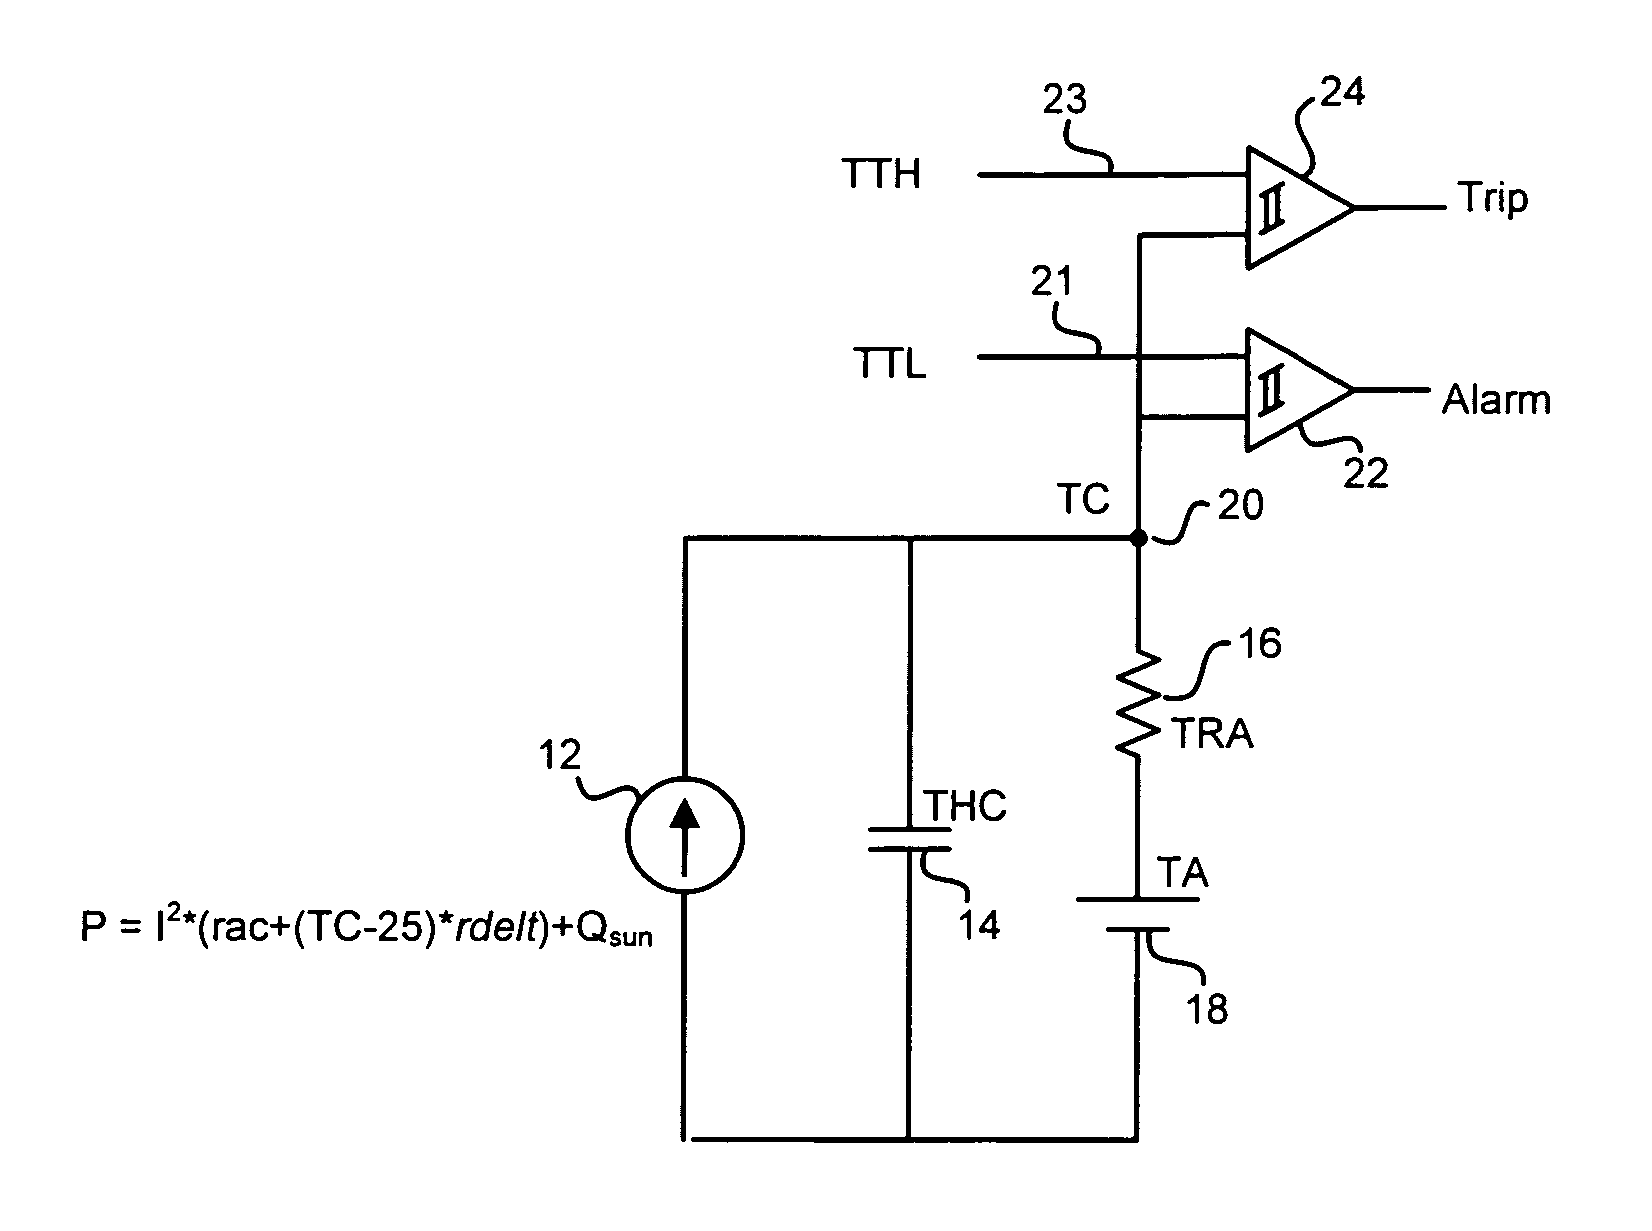 Distance protective relay using a programmable thermal model for thermal protection